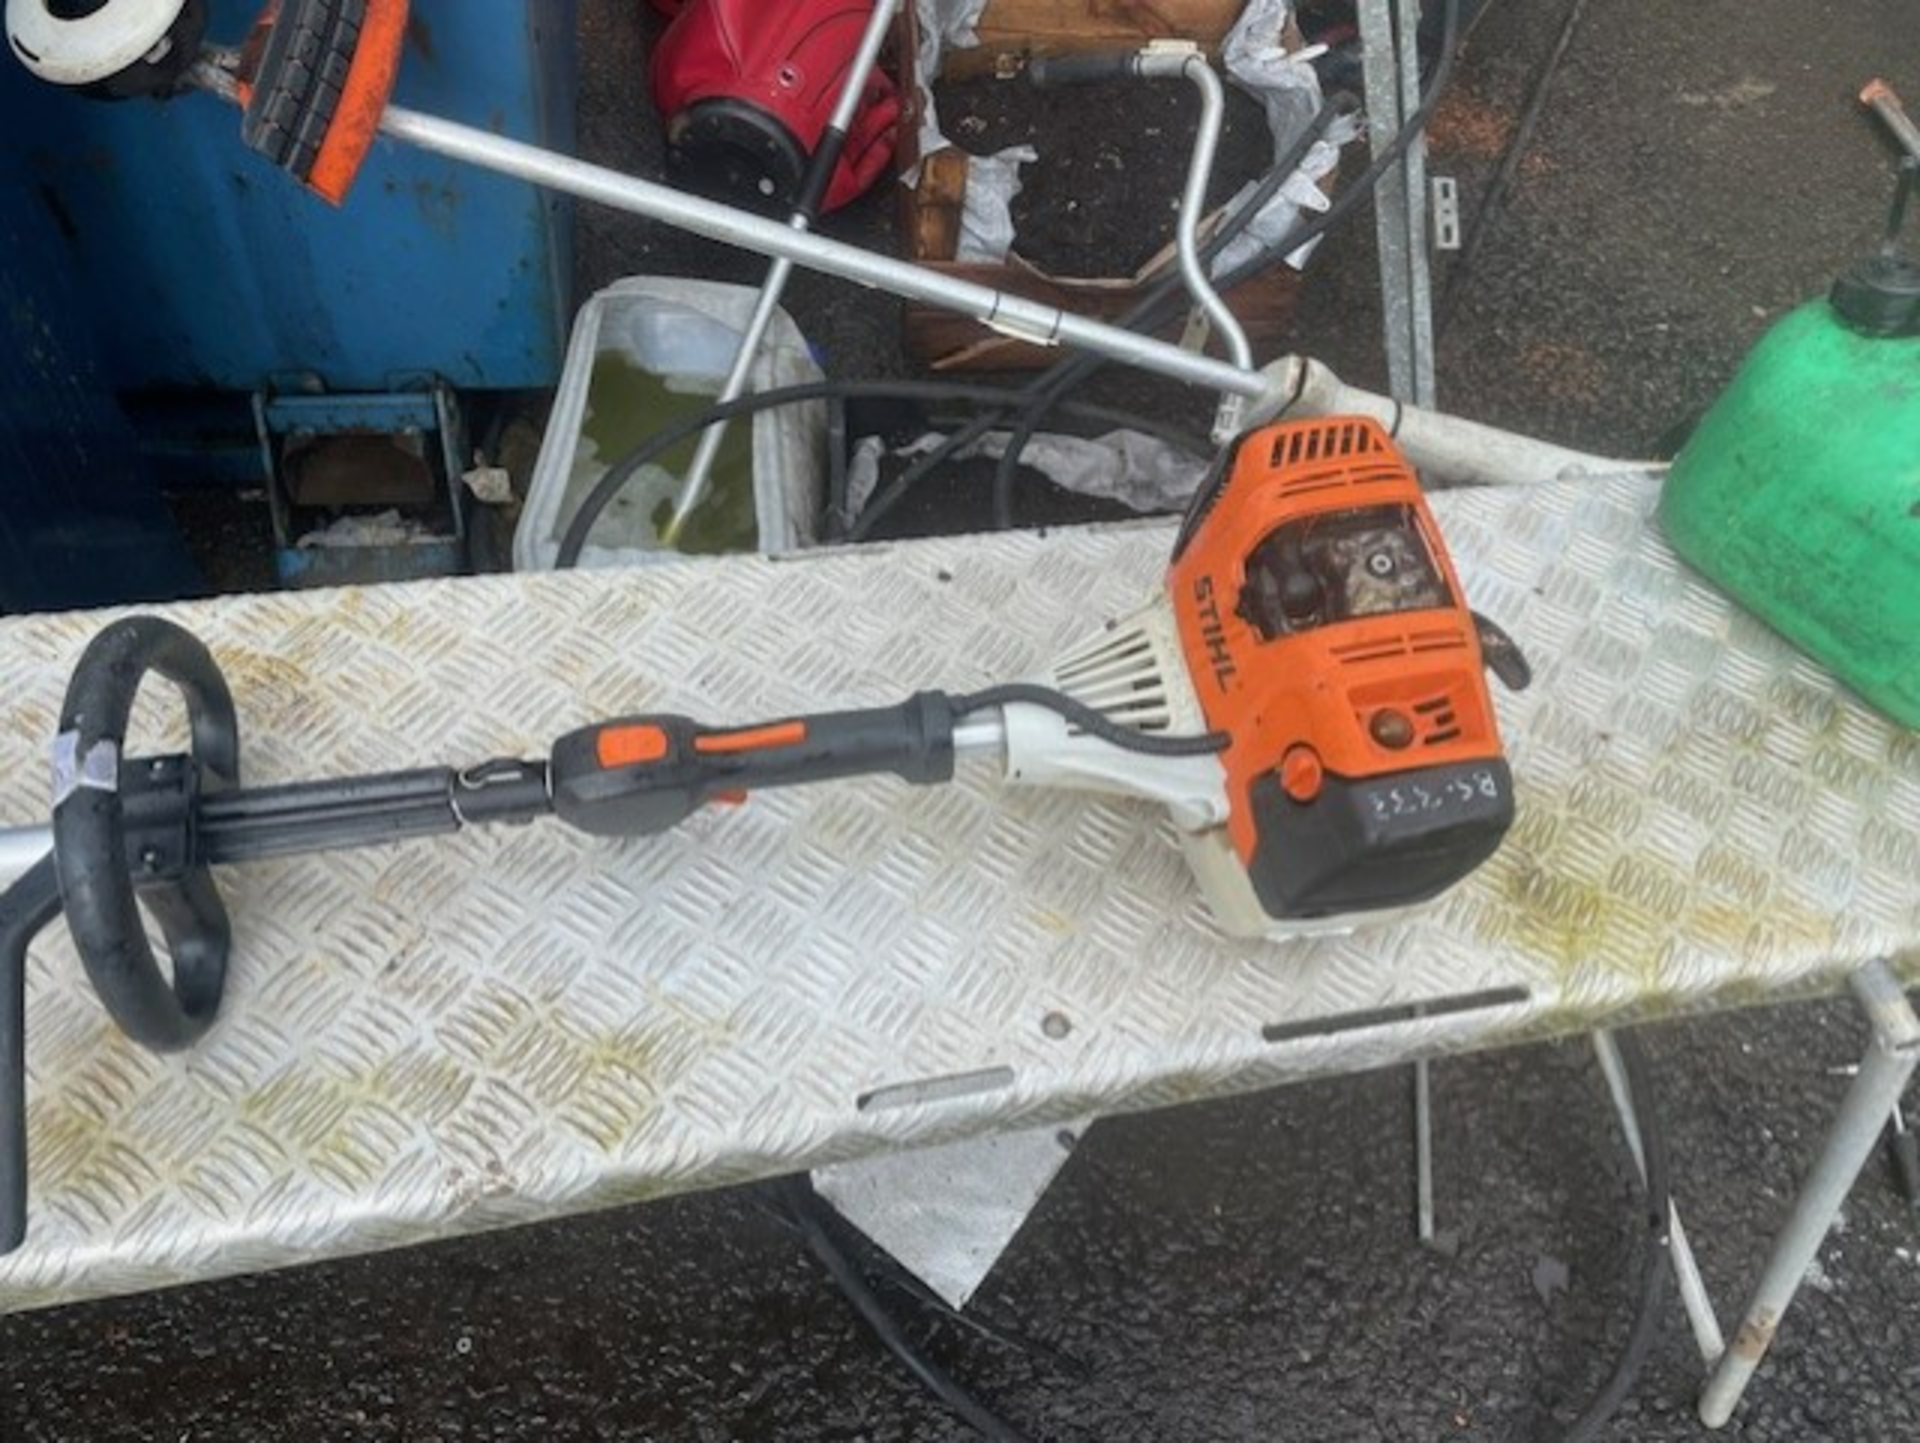 Stihl fs111r as per video working does it all new head for grass cutting any inspection welcome